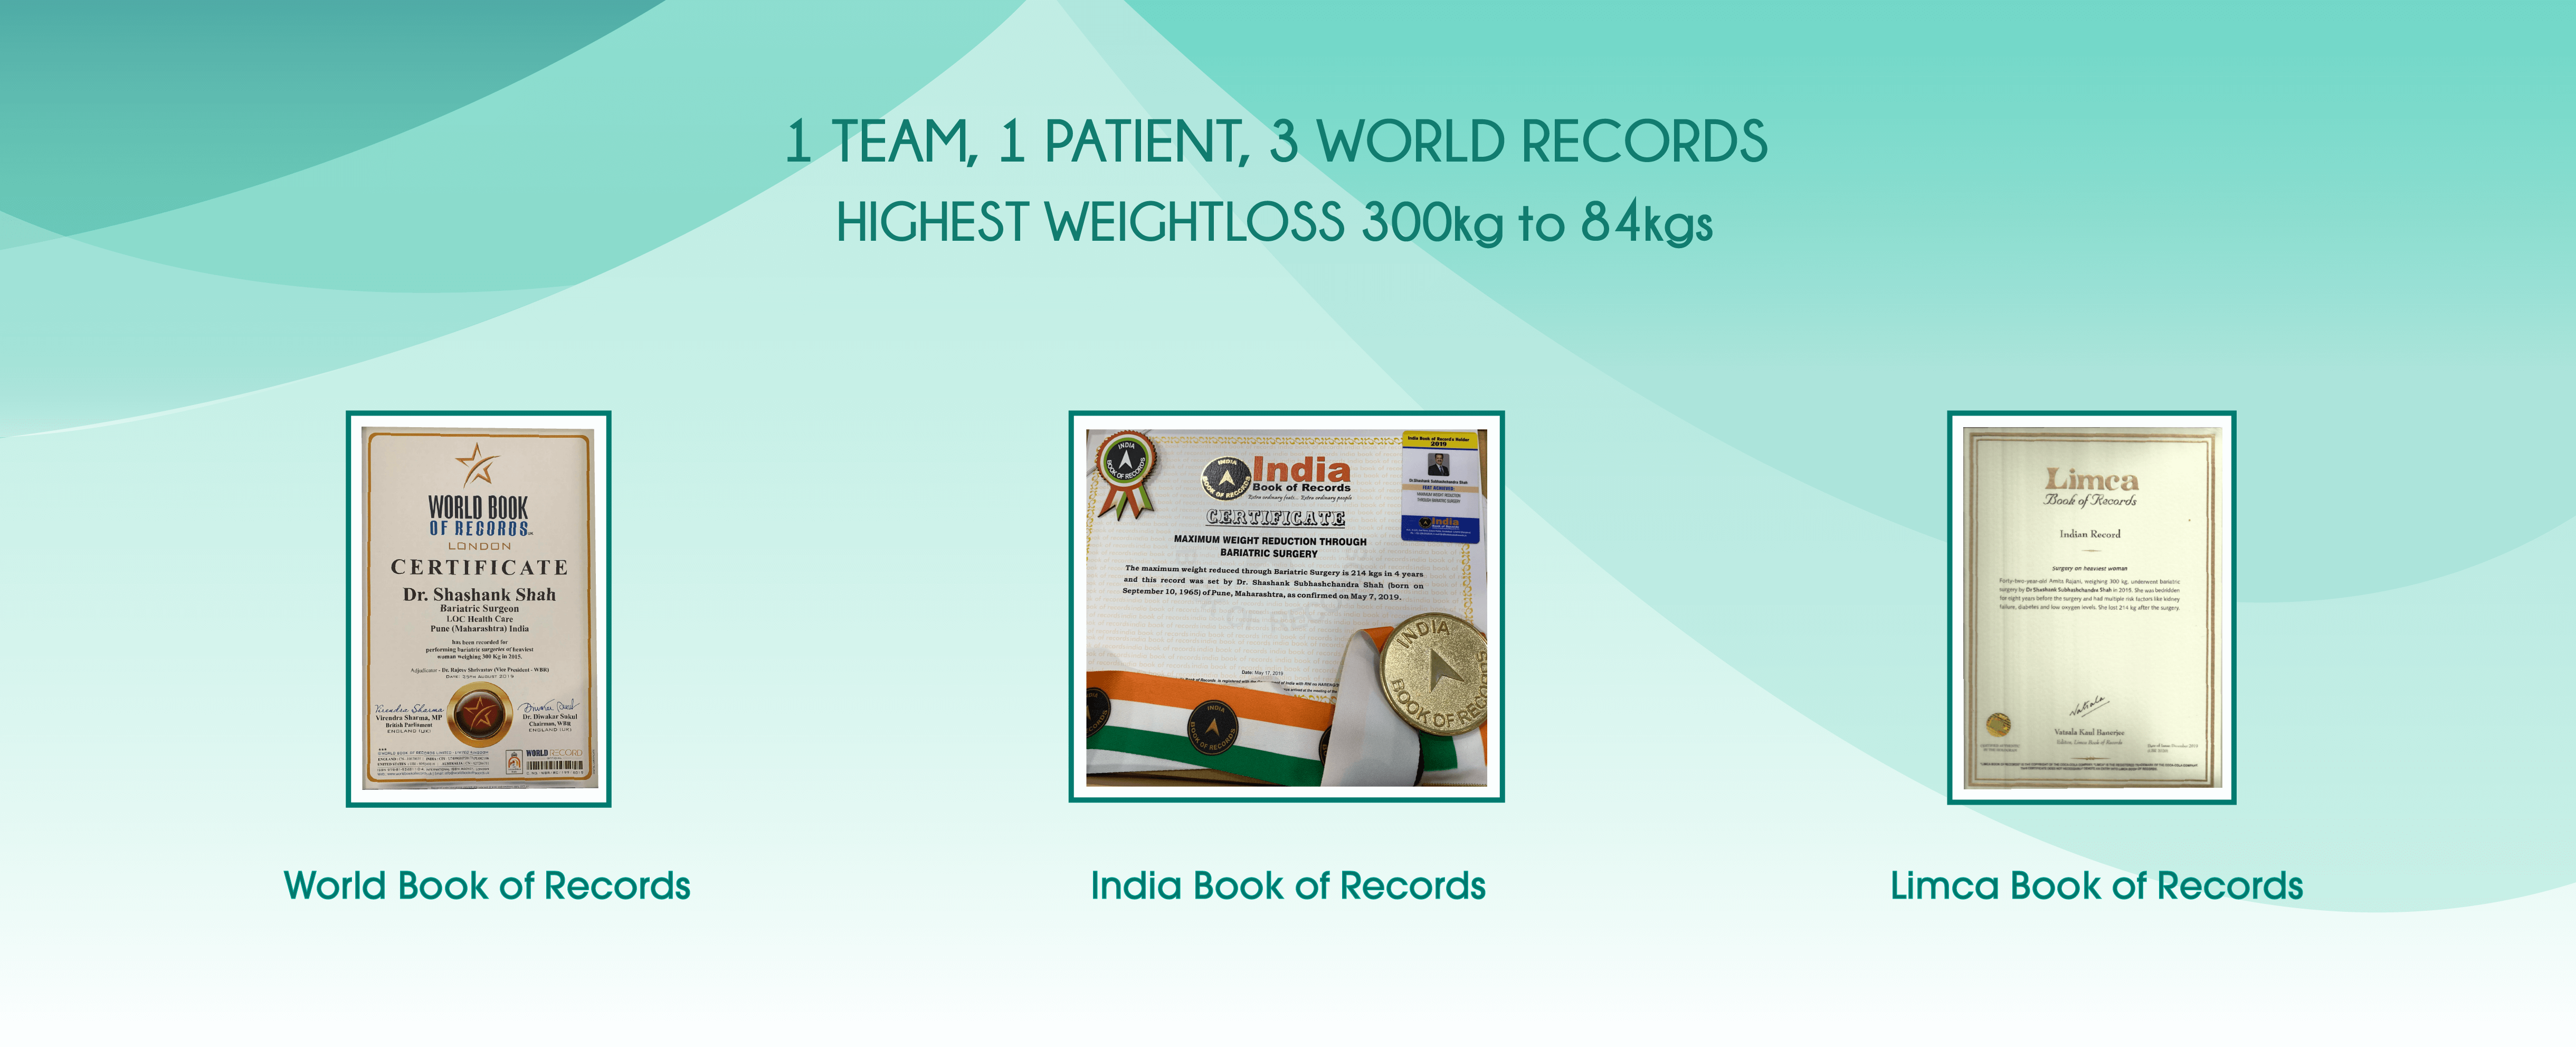 International Patients Treatment For Obesity In India